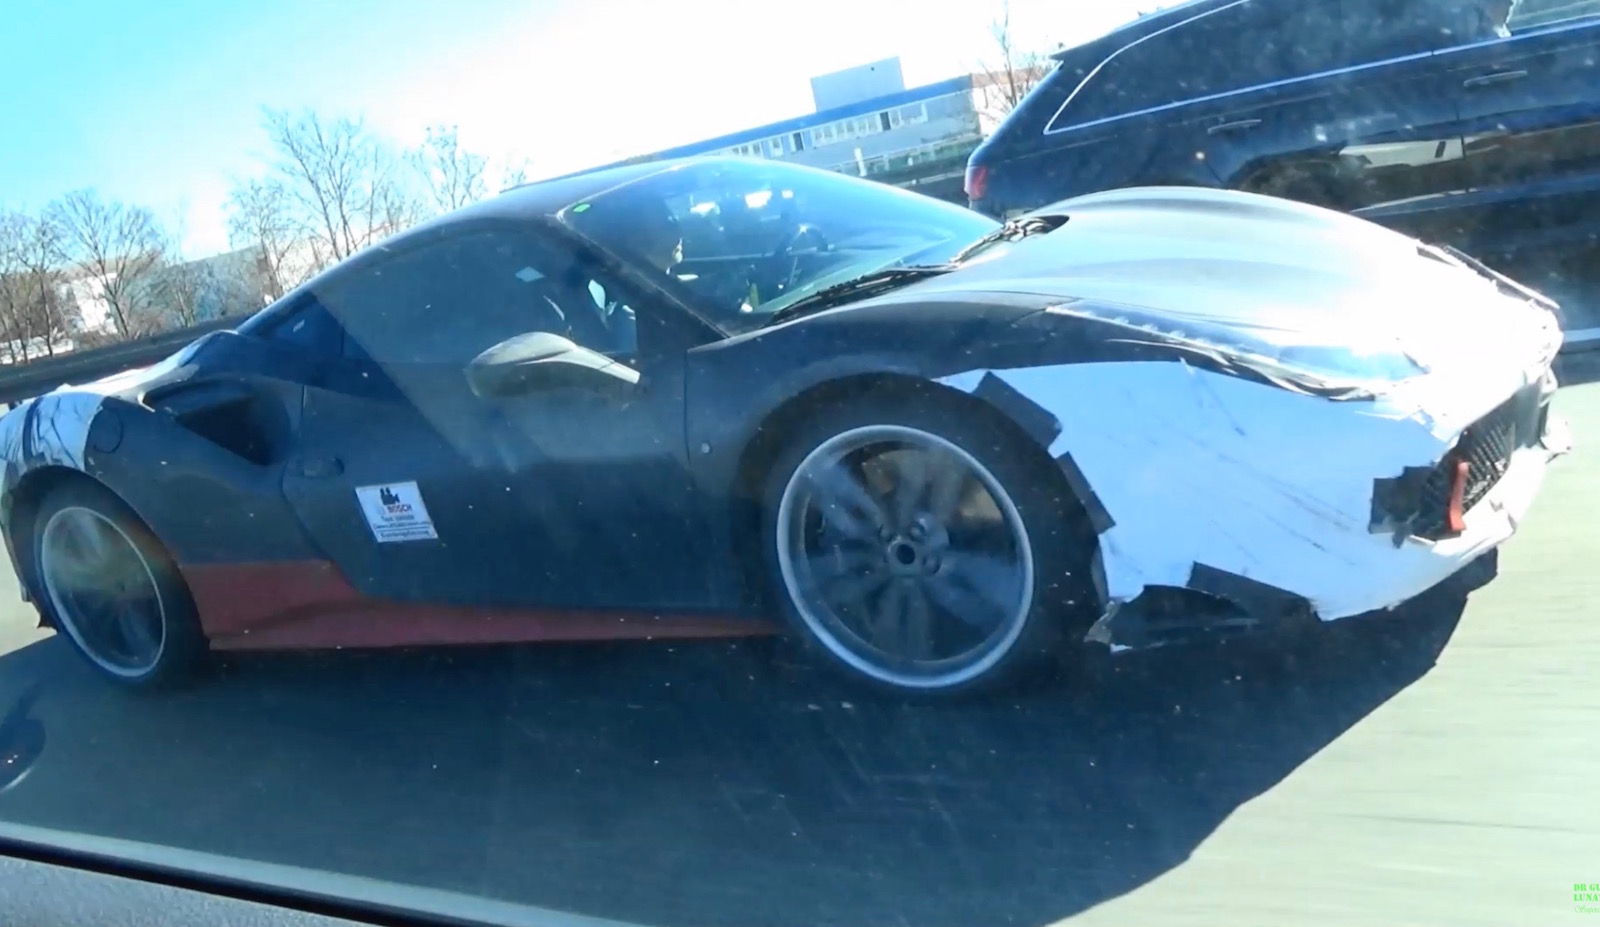 Ferrari V8 hybrid supercar to debut this year, prototype spotted (video)